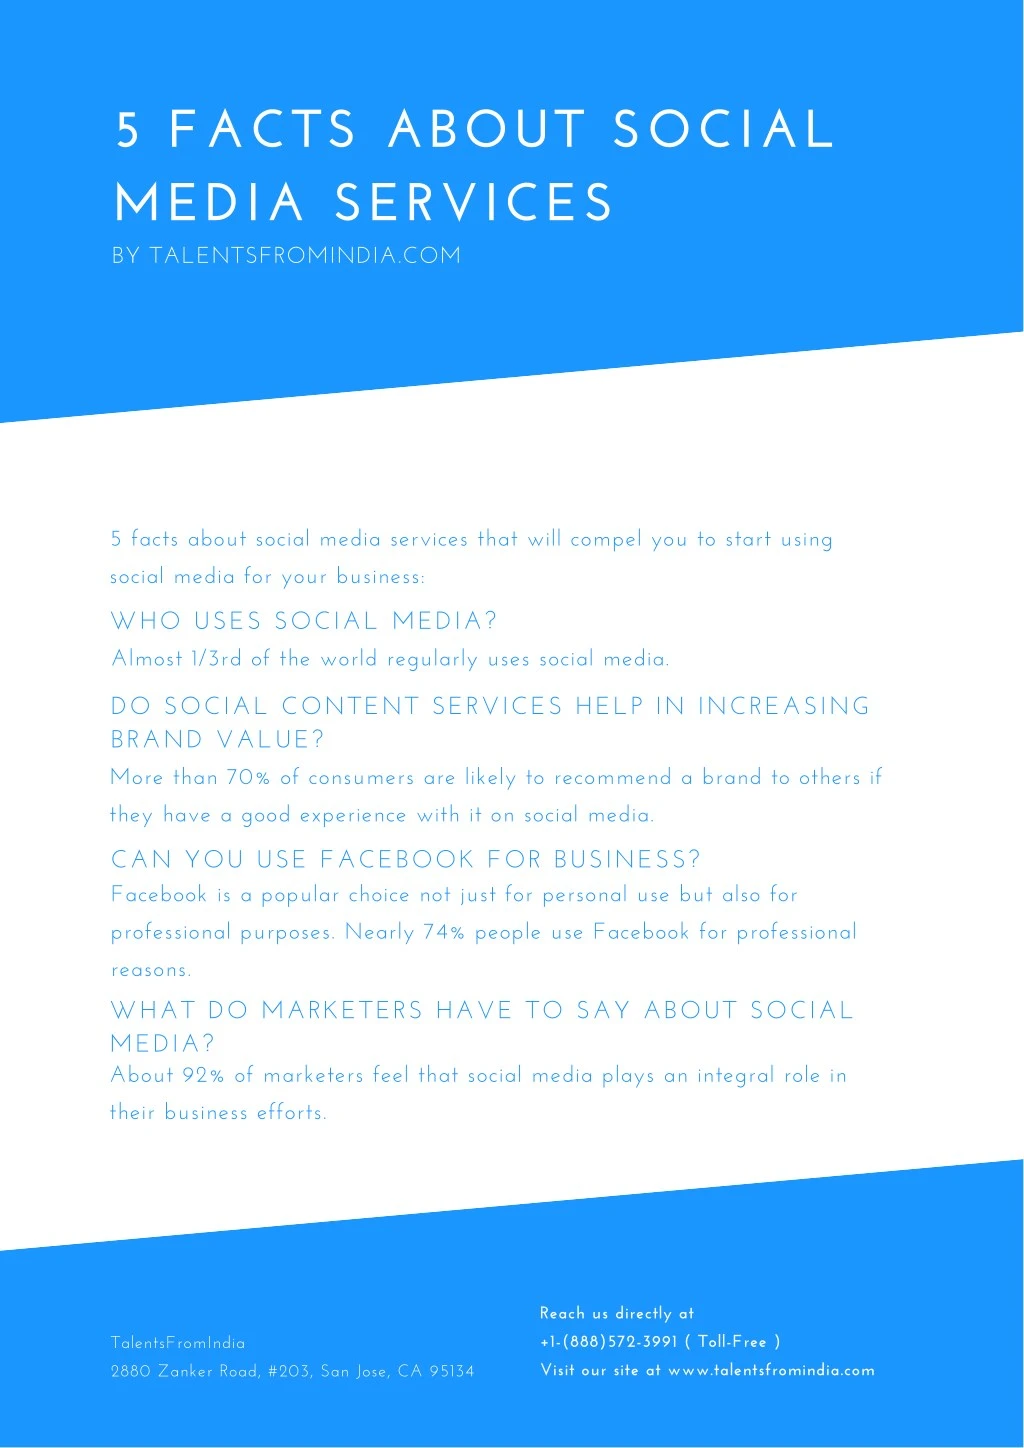 5 facts about social media services